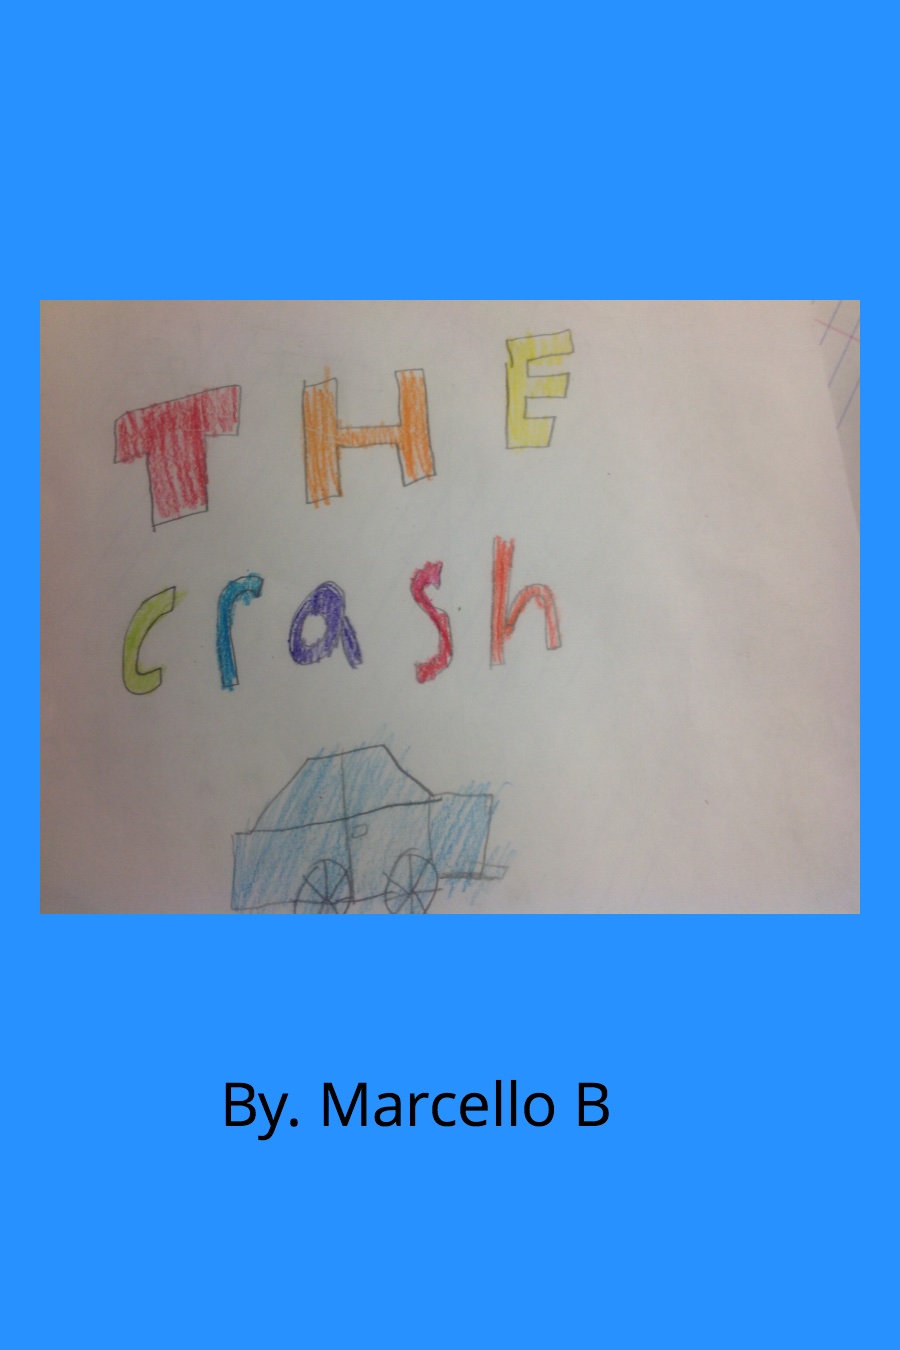 The Crash by Marcello B